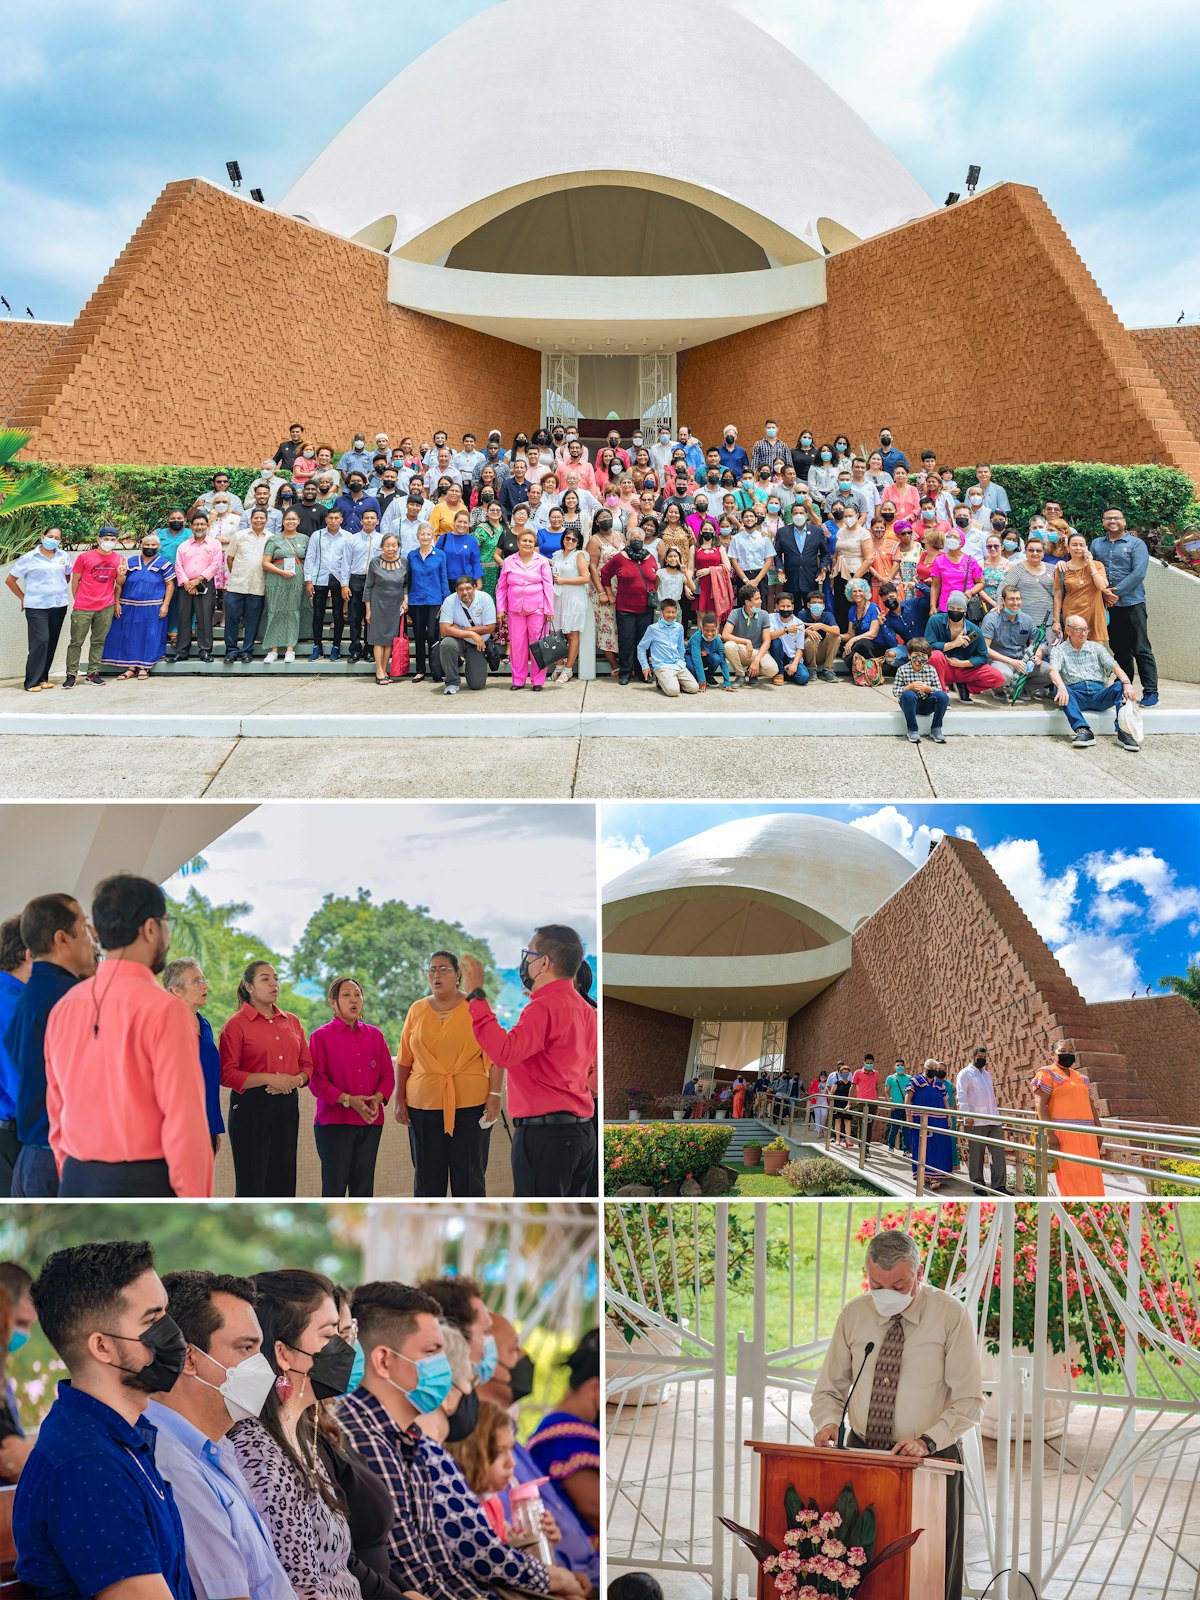 The Bahá’í House of Worship in Panama celebrated 50 years since its inauguration.